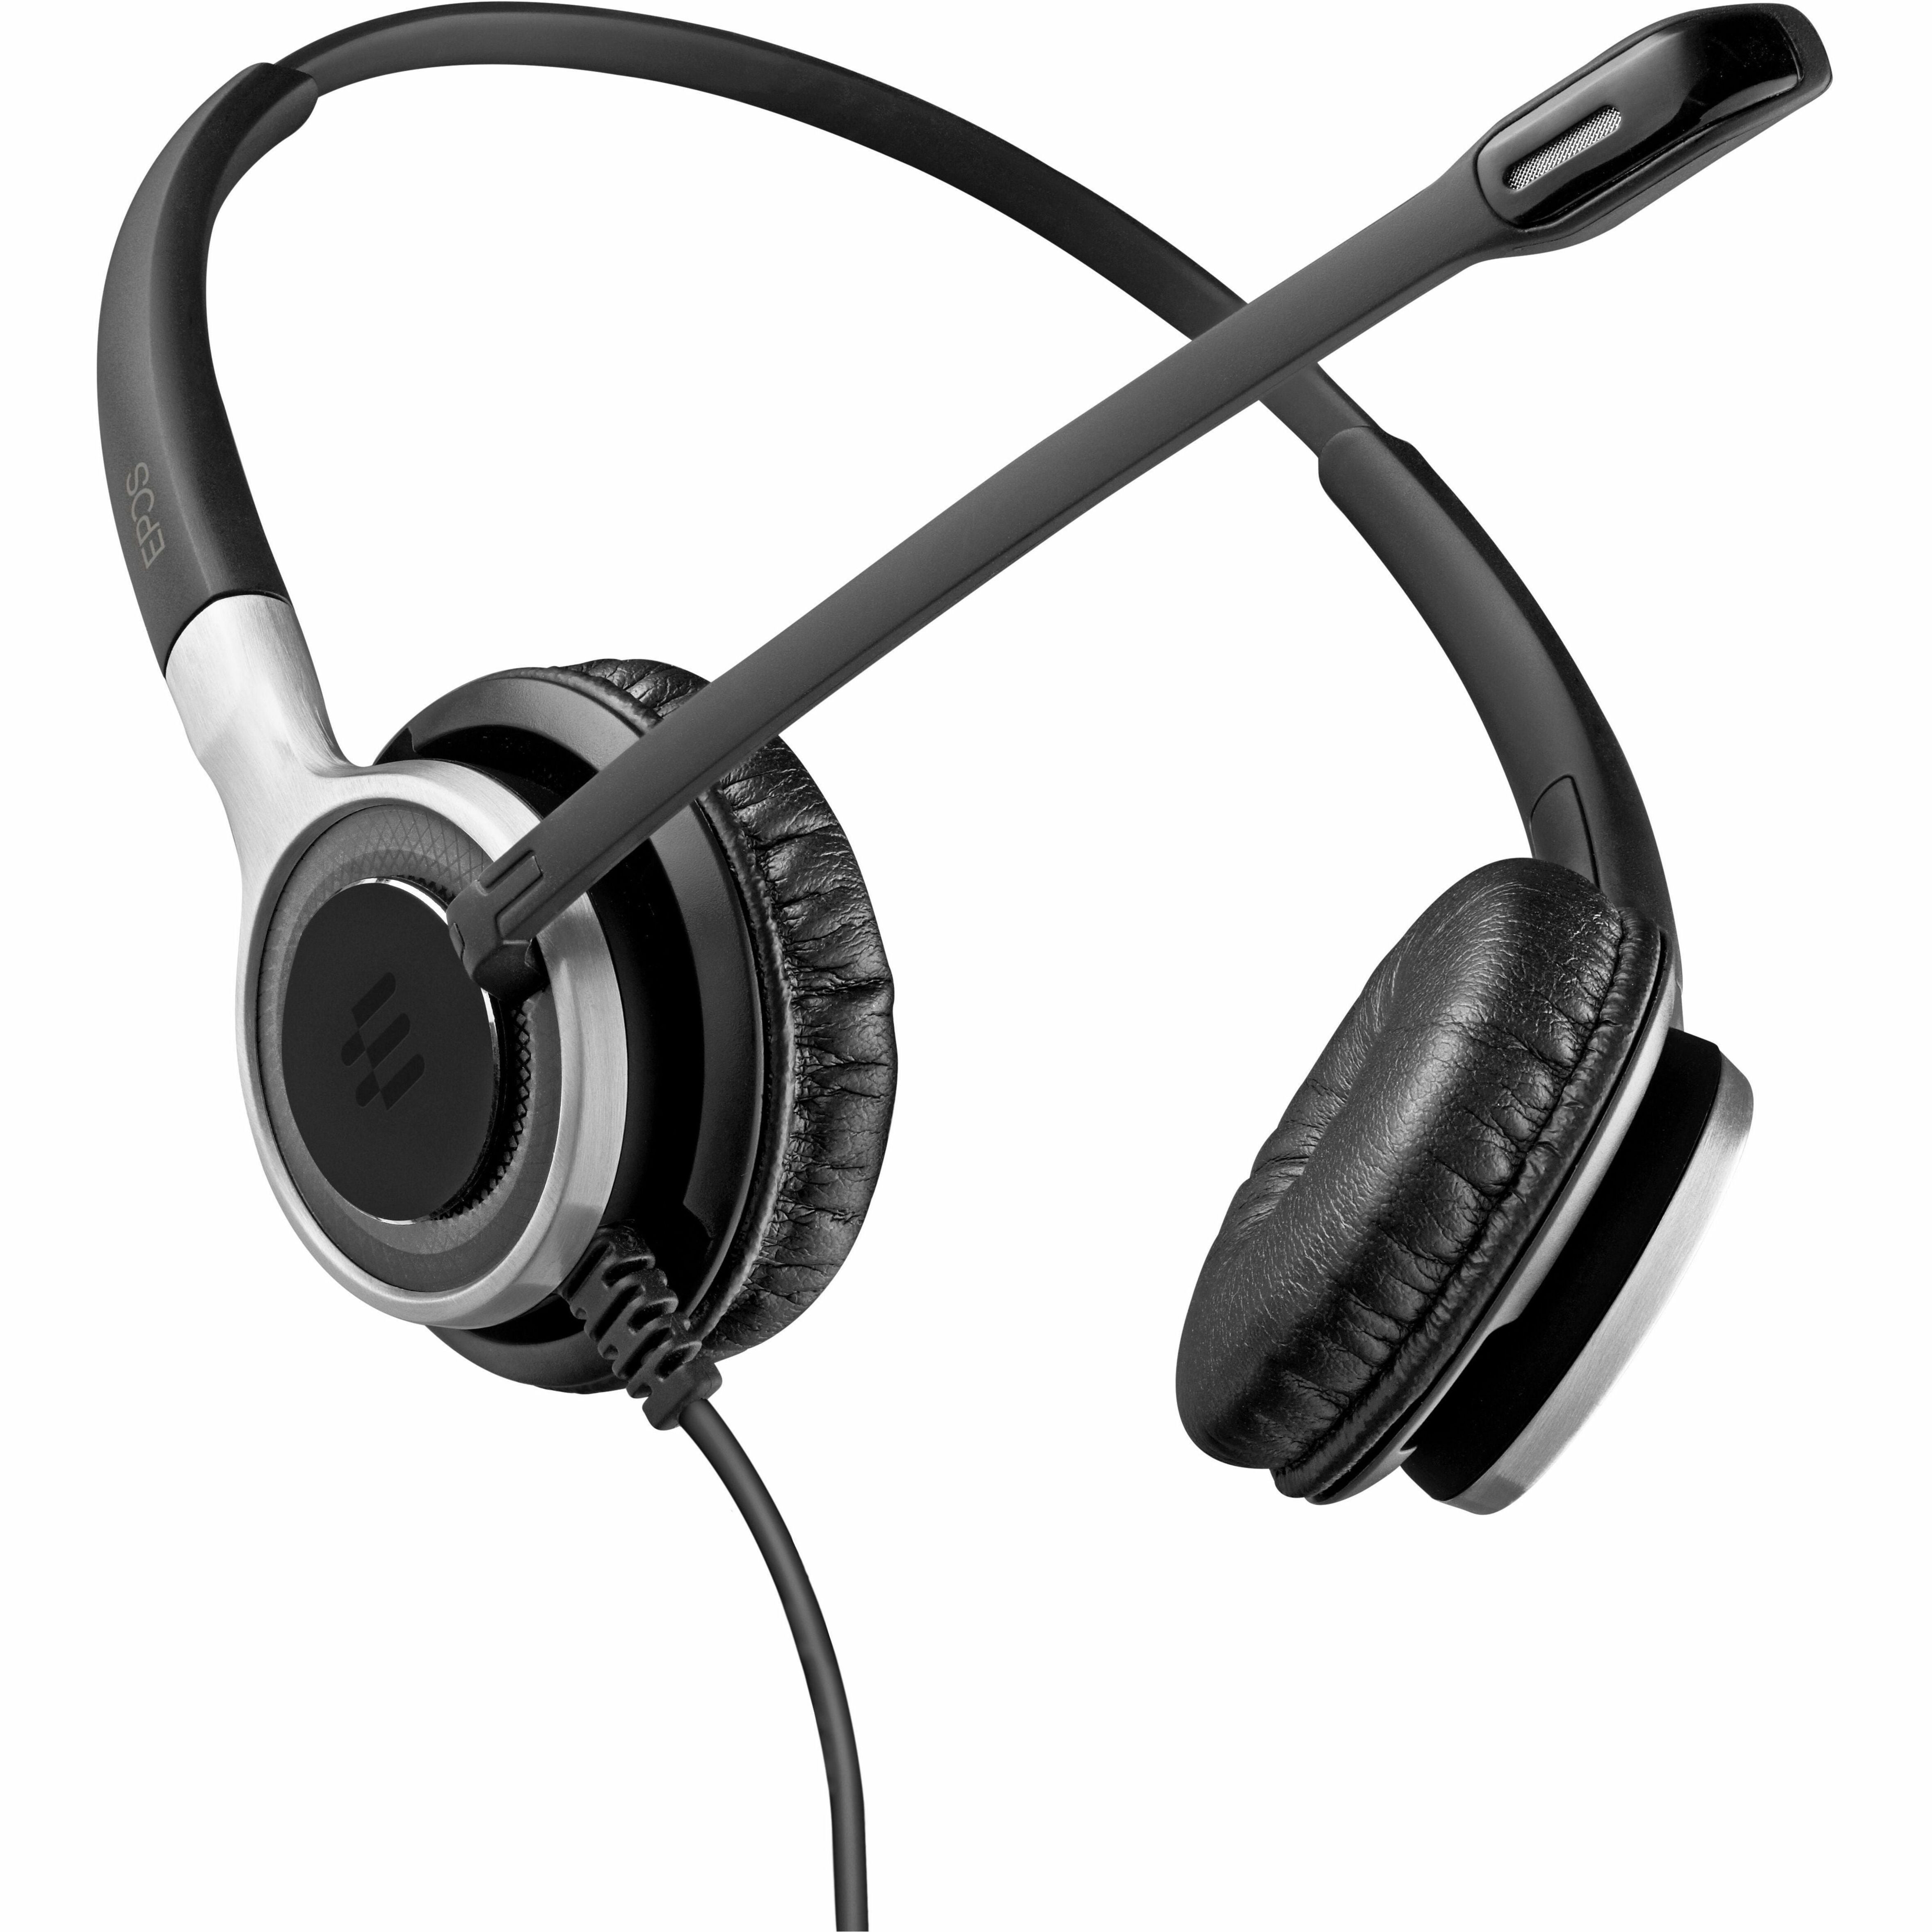 EPOS | SENNHEISER EPOS IMPACT SC 660 Stereo On-ear Headset - Noise Cancelling Microphone - Black, Silver [Discontinued]